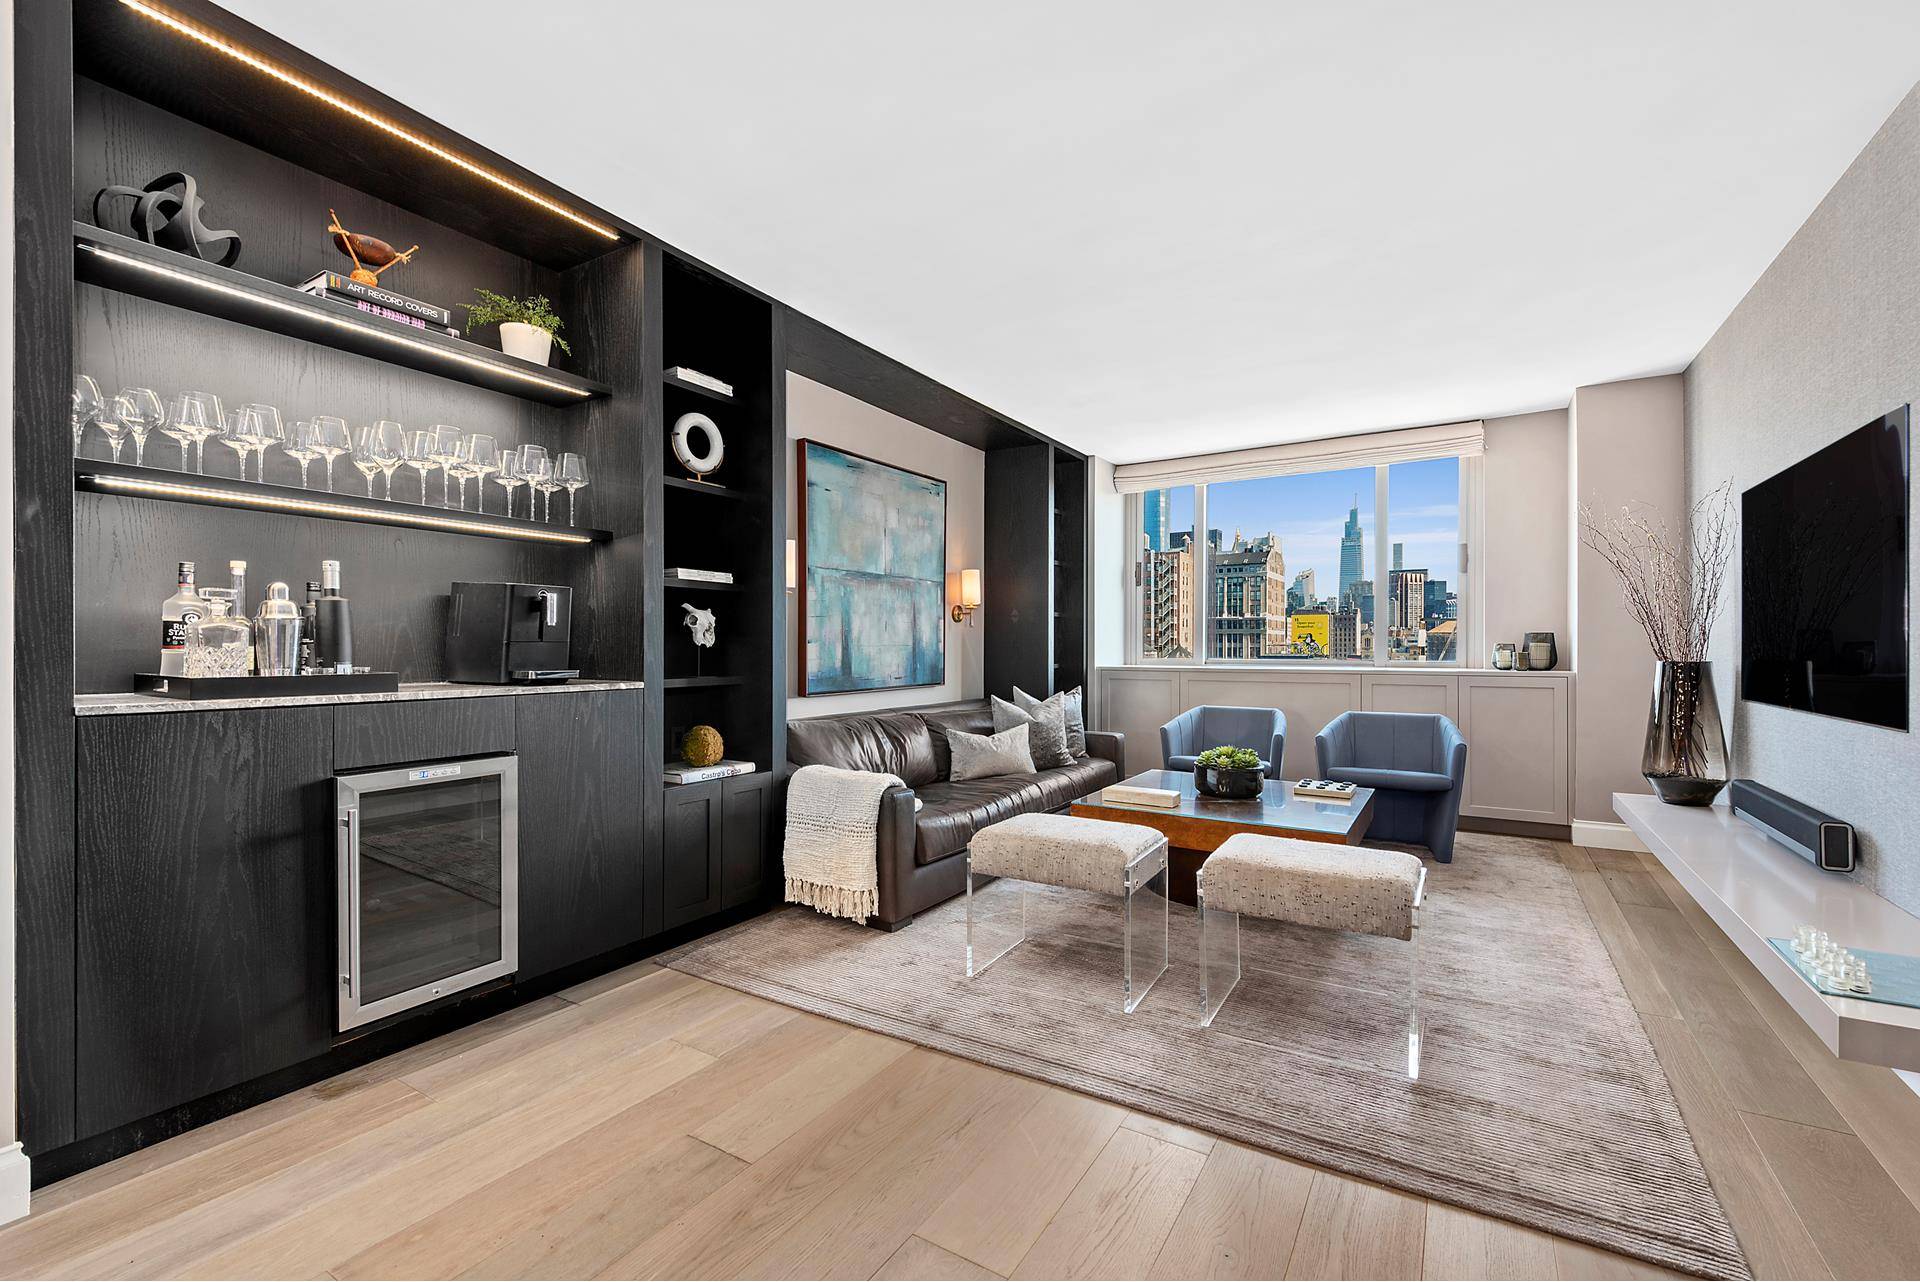 Incomparable One Bedroom Condo with Open City Views Meticulously renovated by the Brooklyn based design team, Black and Steel Studio, this stunning high floor one bedroom with great light and ...